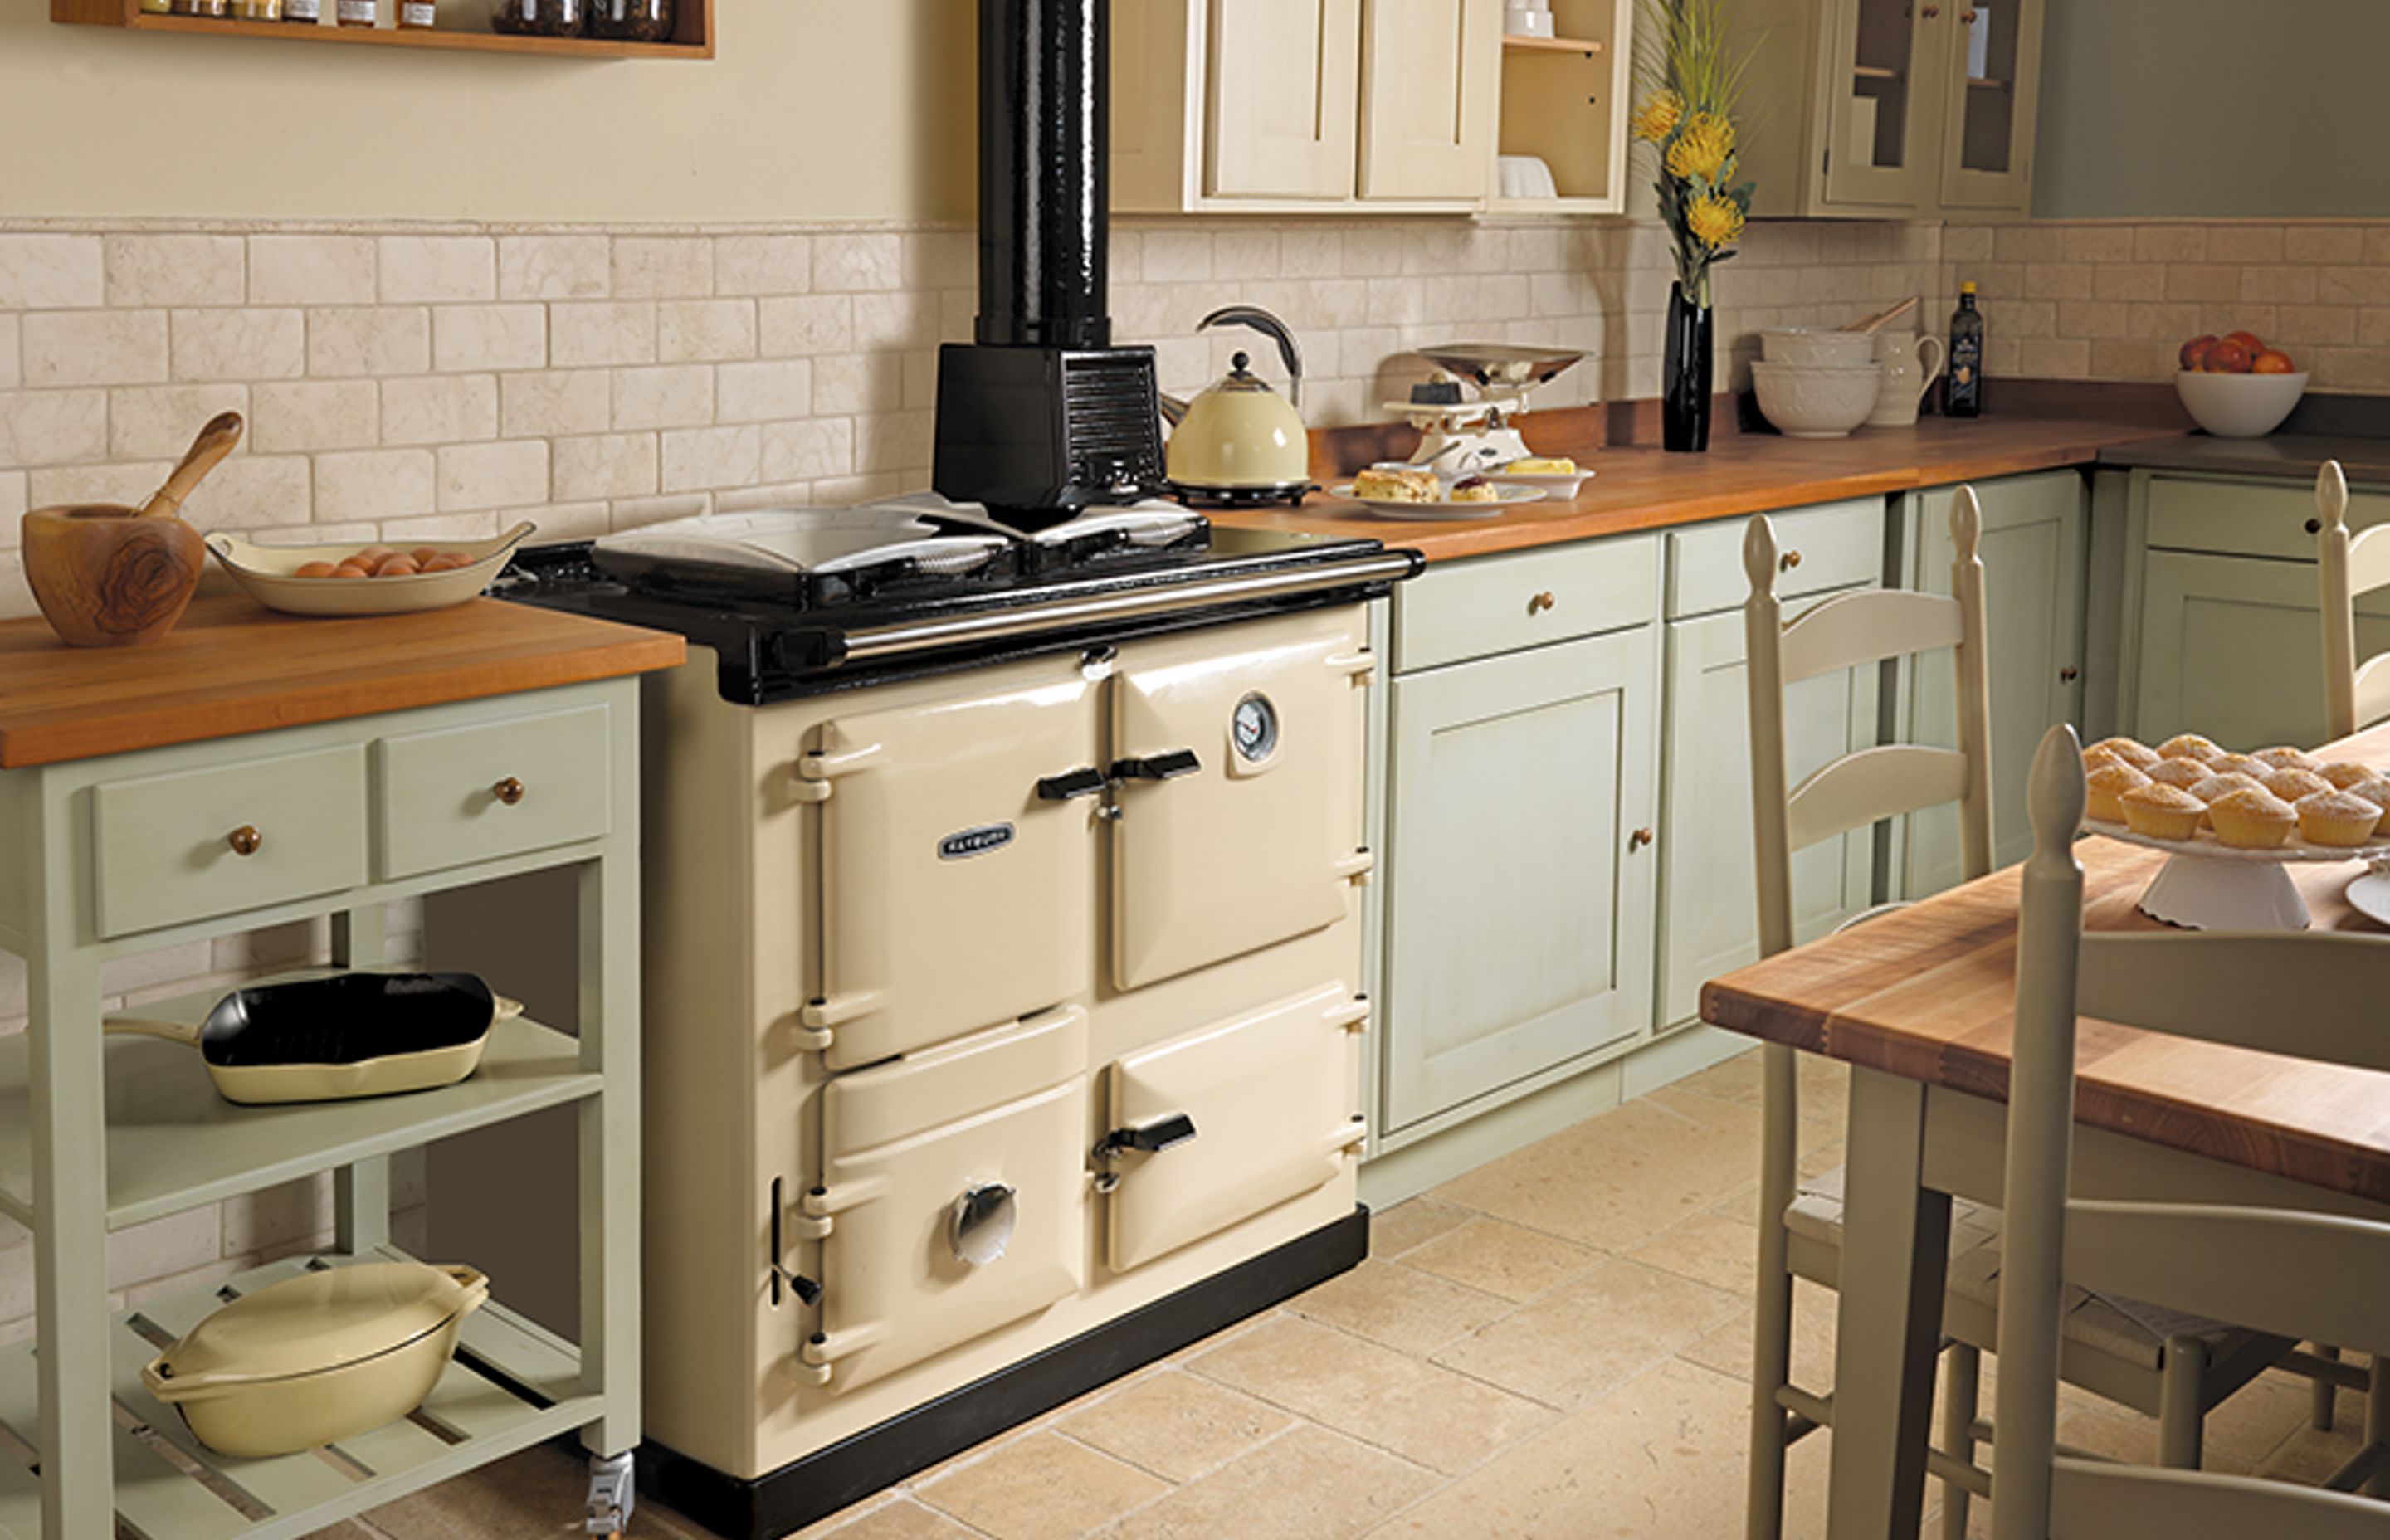 The wood- or solid fuel-powered Rayburn oven provides peerless cooking performance with the added convenience of domestic hot water and/or central heating when connected to radiators via a wetback system.